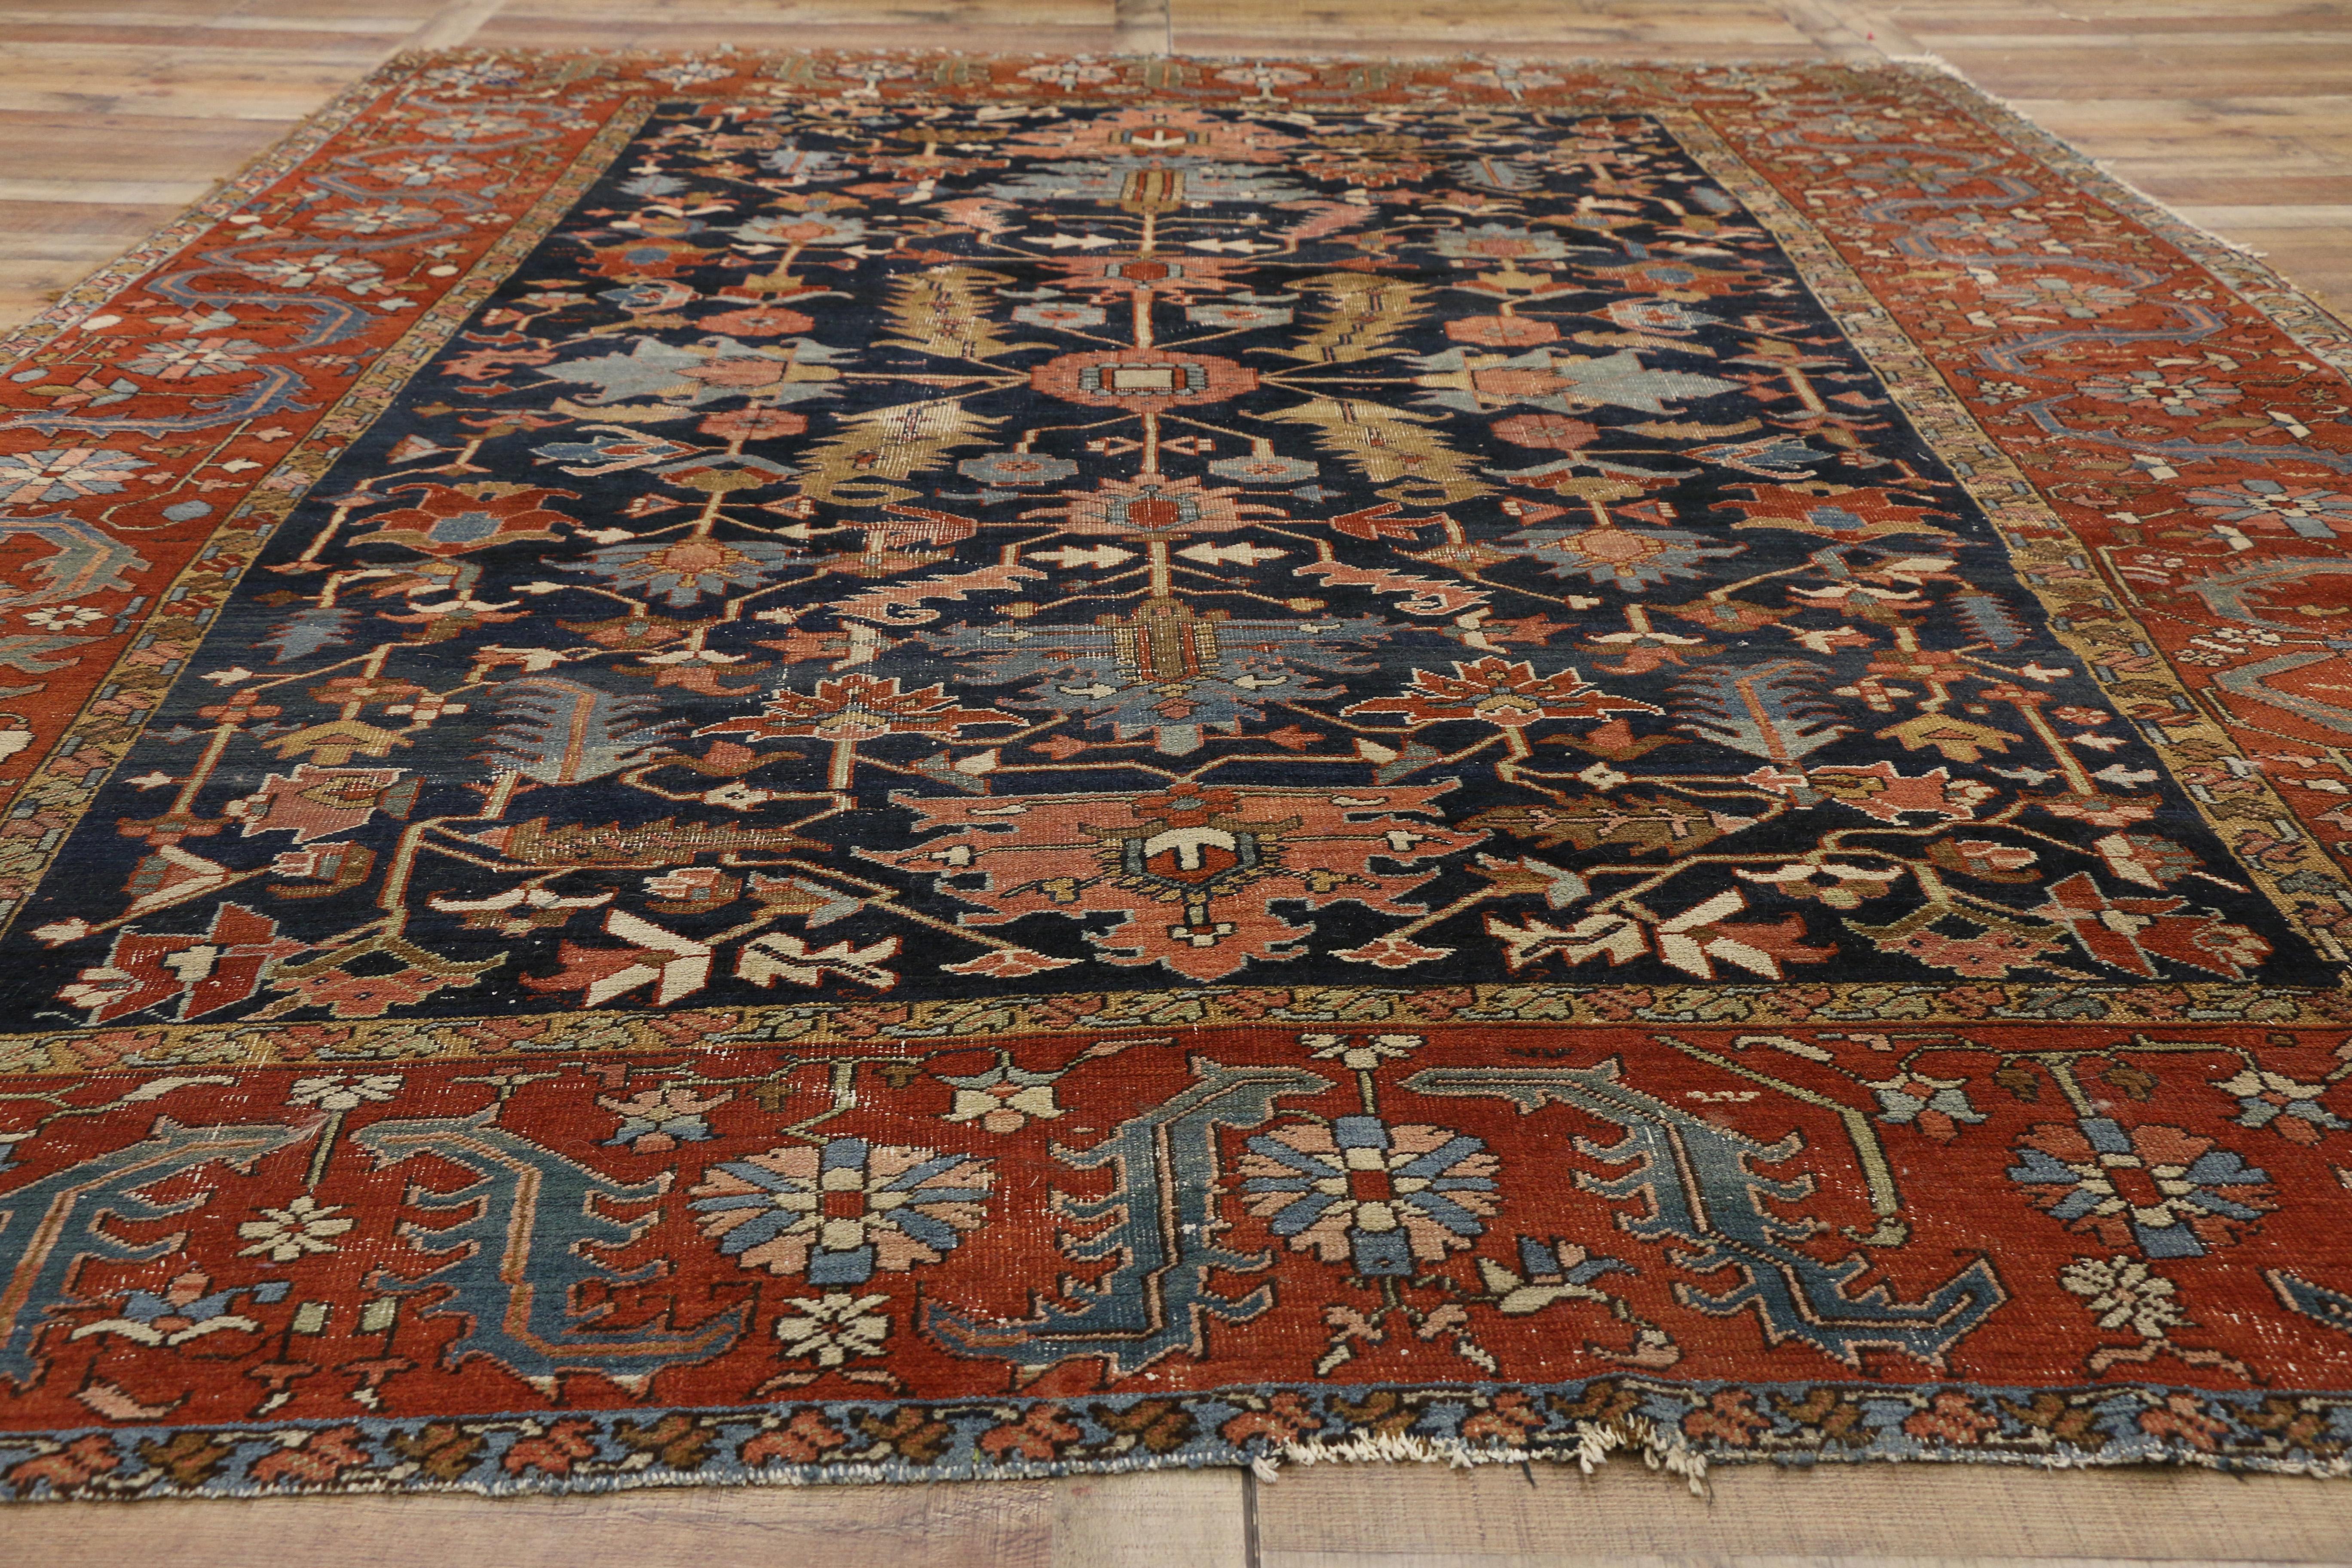 19th Century Distressed Antique Persian All-Over Serapi Rug with Rustic Downton Abbey Style For Sale